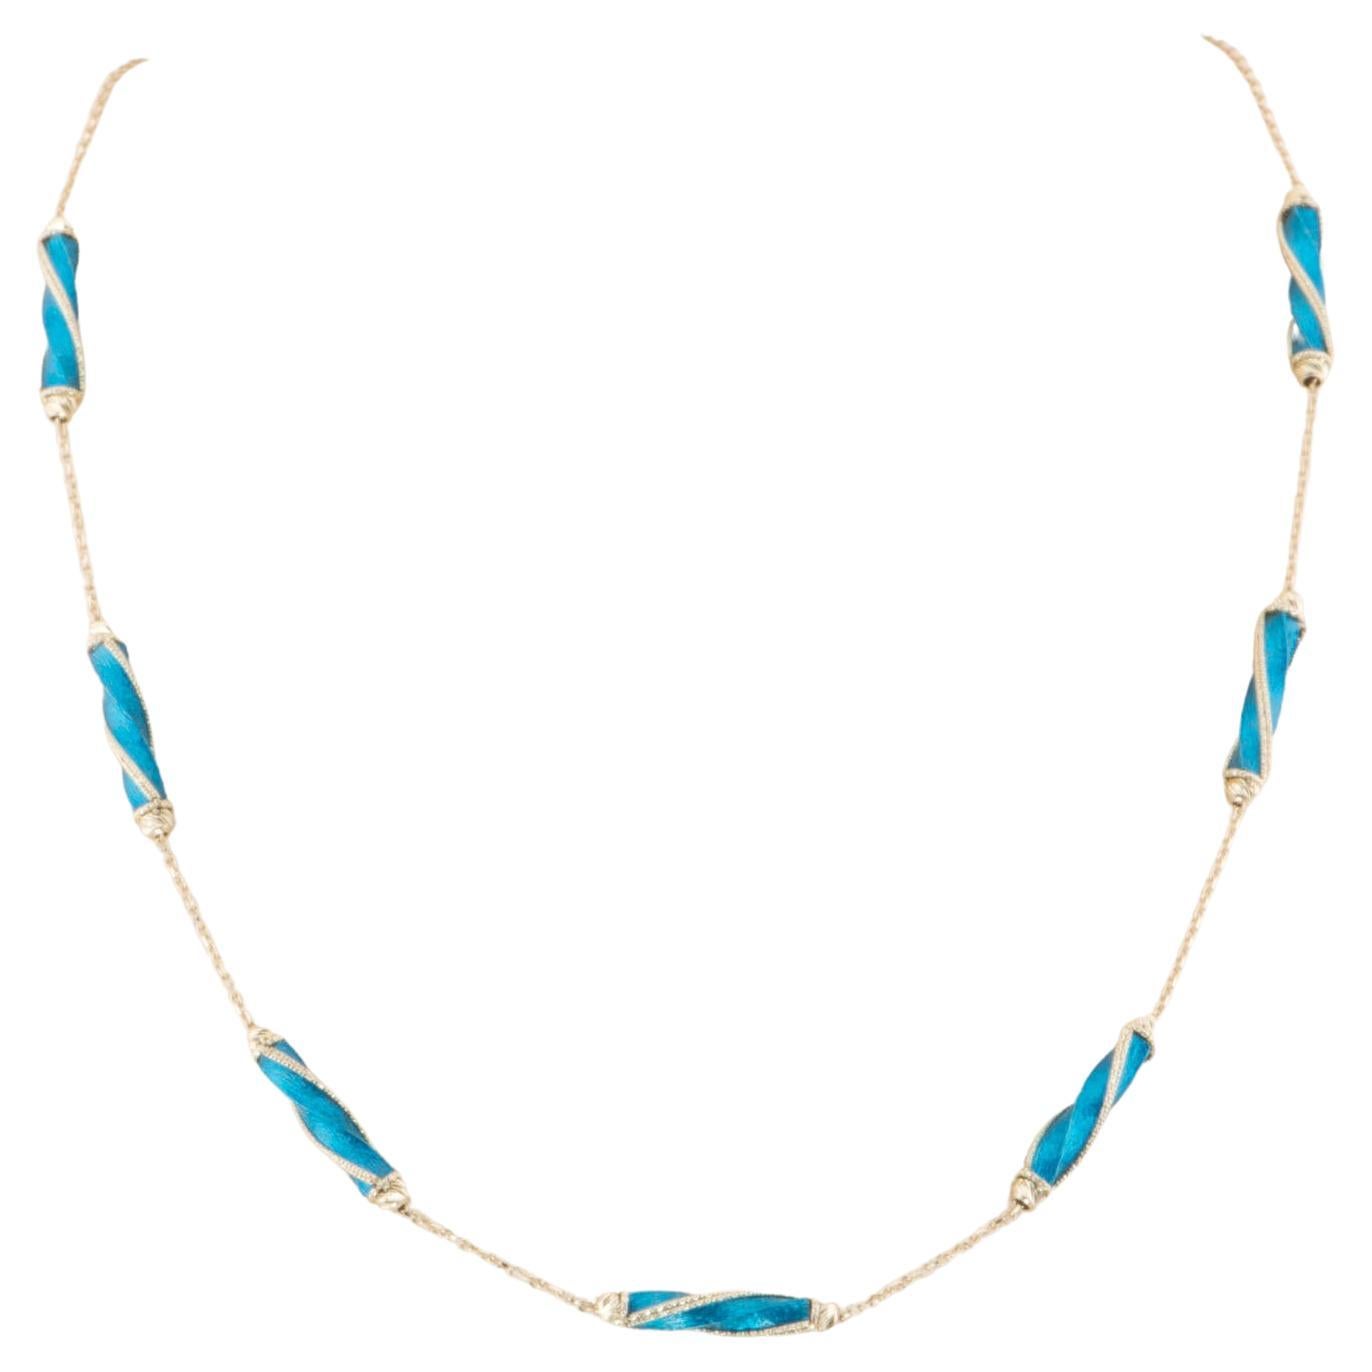 16" 14K Gold Necklace 6.9g Diamond Cut and Bright Blue Enamel Spiral Links R4509 For Sale